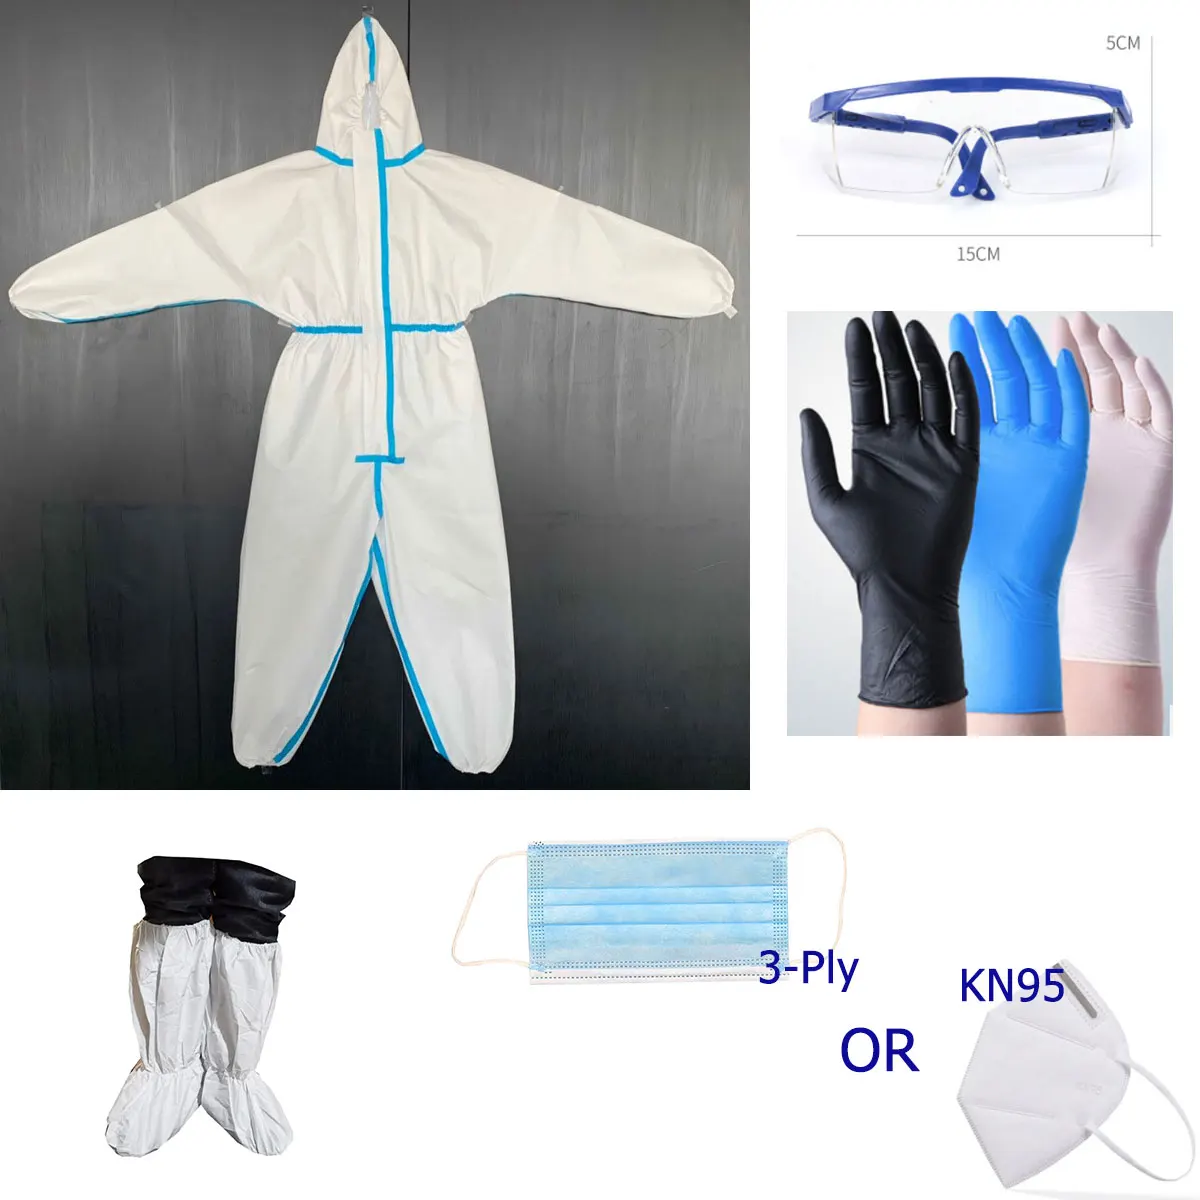 
Disposable Protective PPE coverall kit 